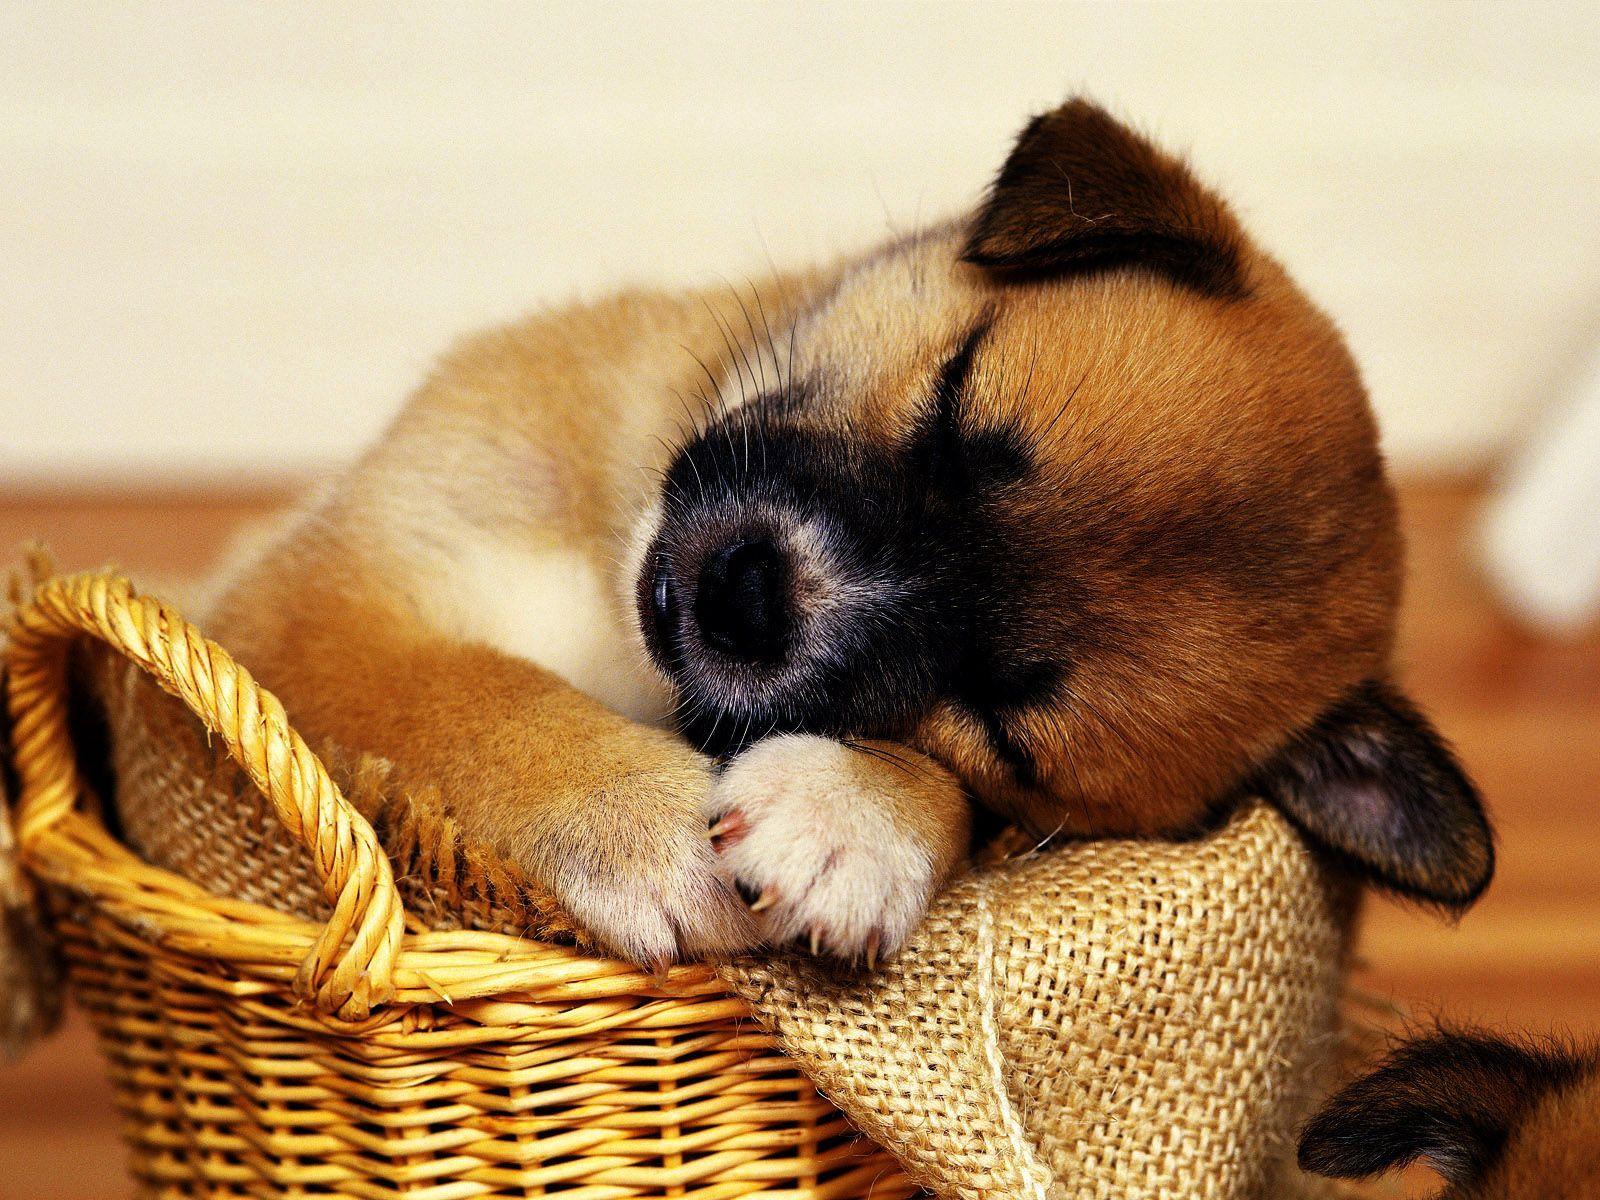 Central Wallpaper: Cute Puppies HD Wallpaper Collection